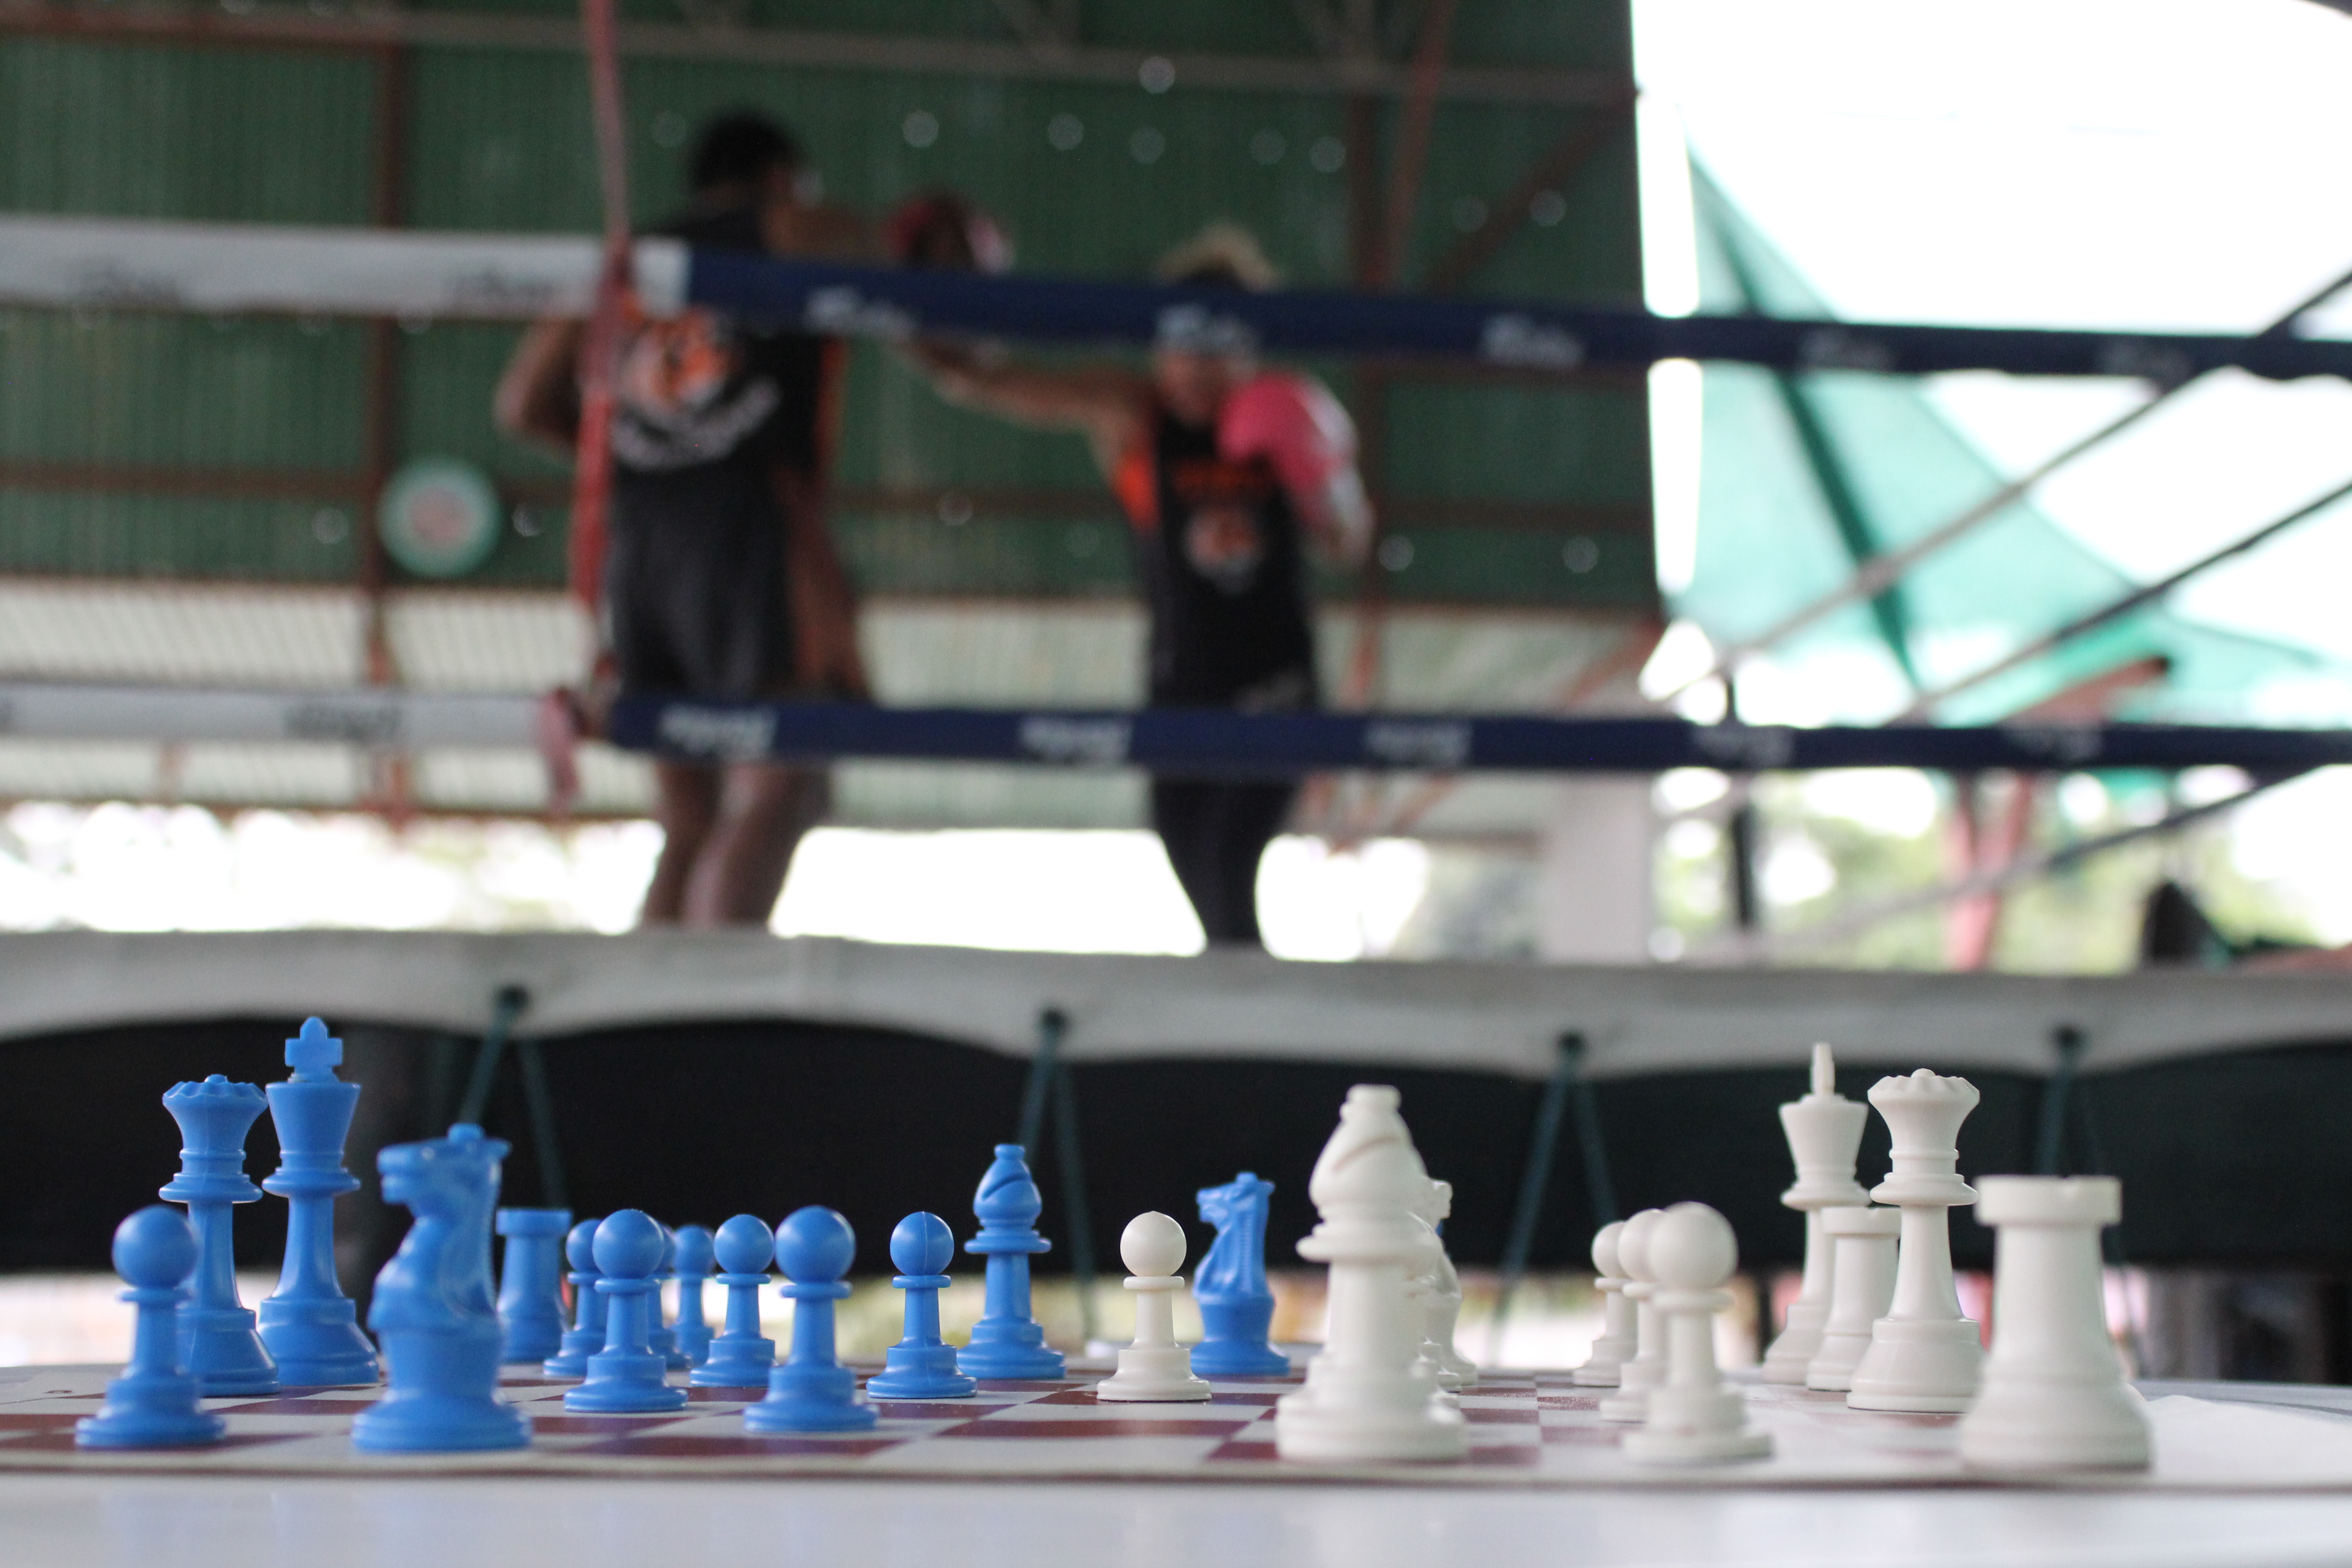 Physical Chess: The mind game of boxing - The Martha's Vineyard Times